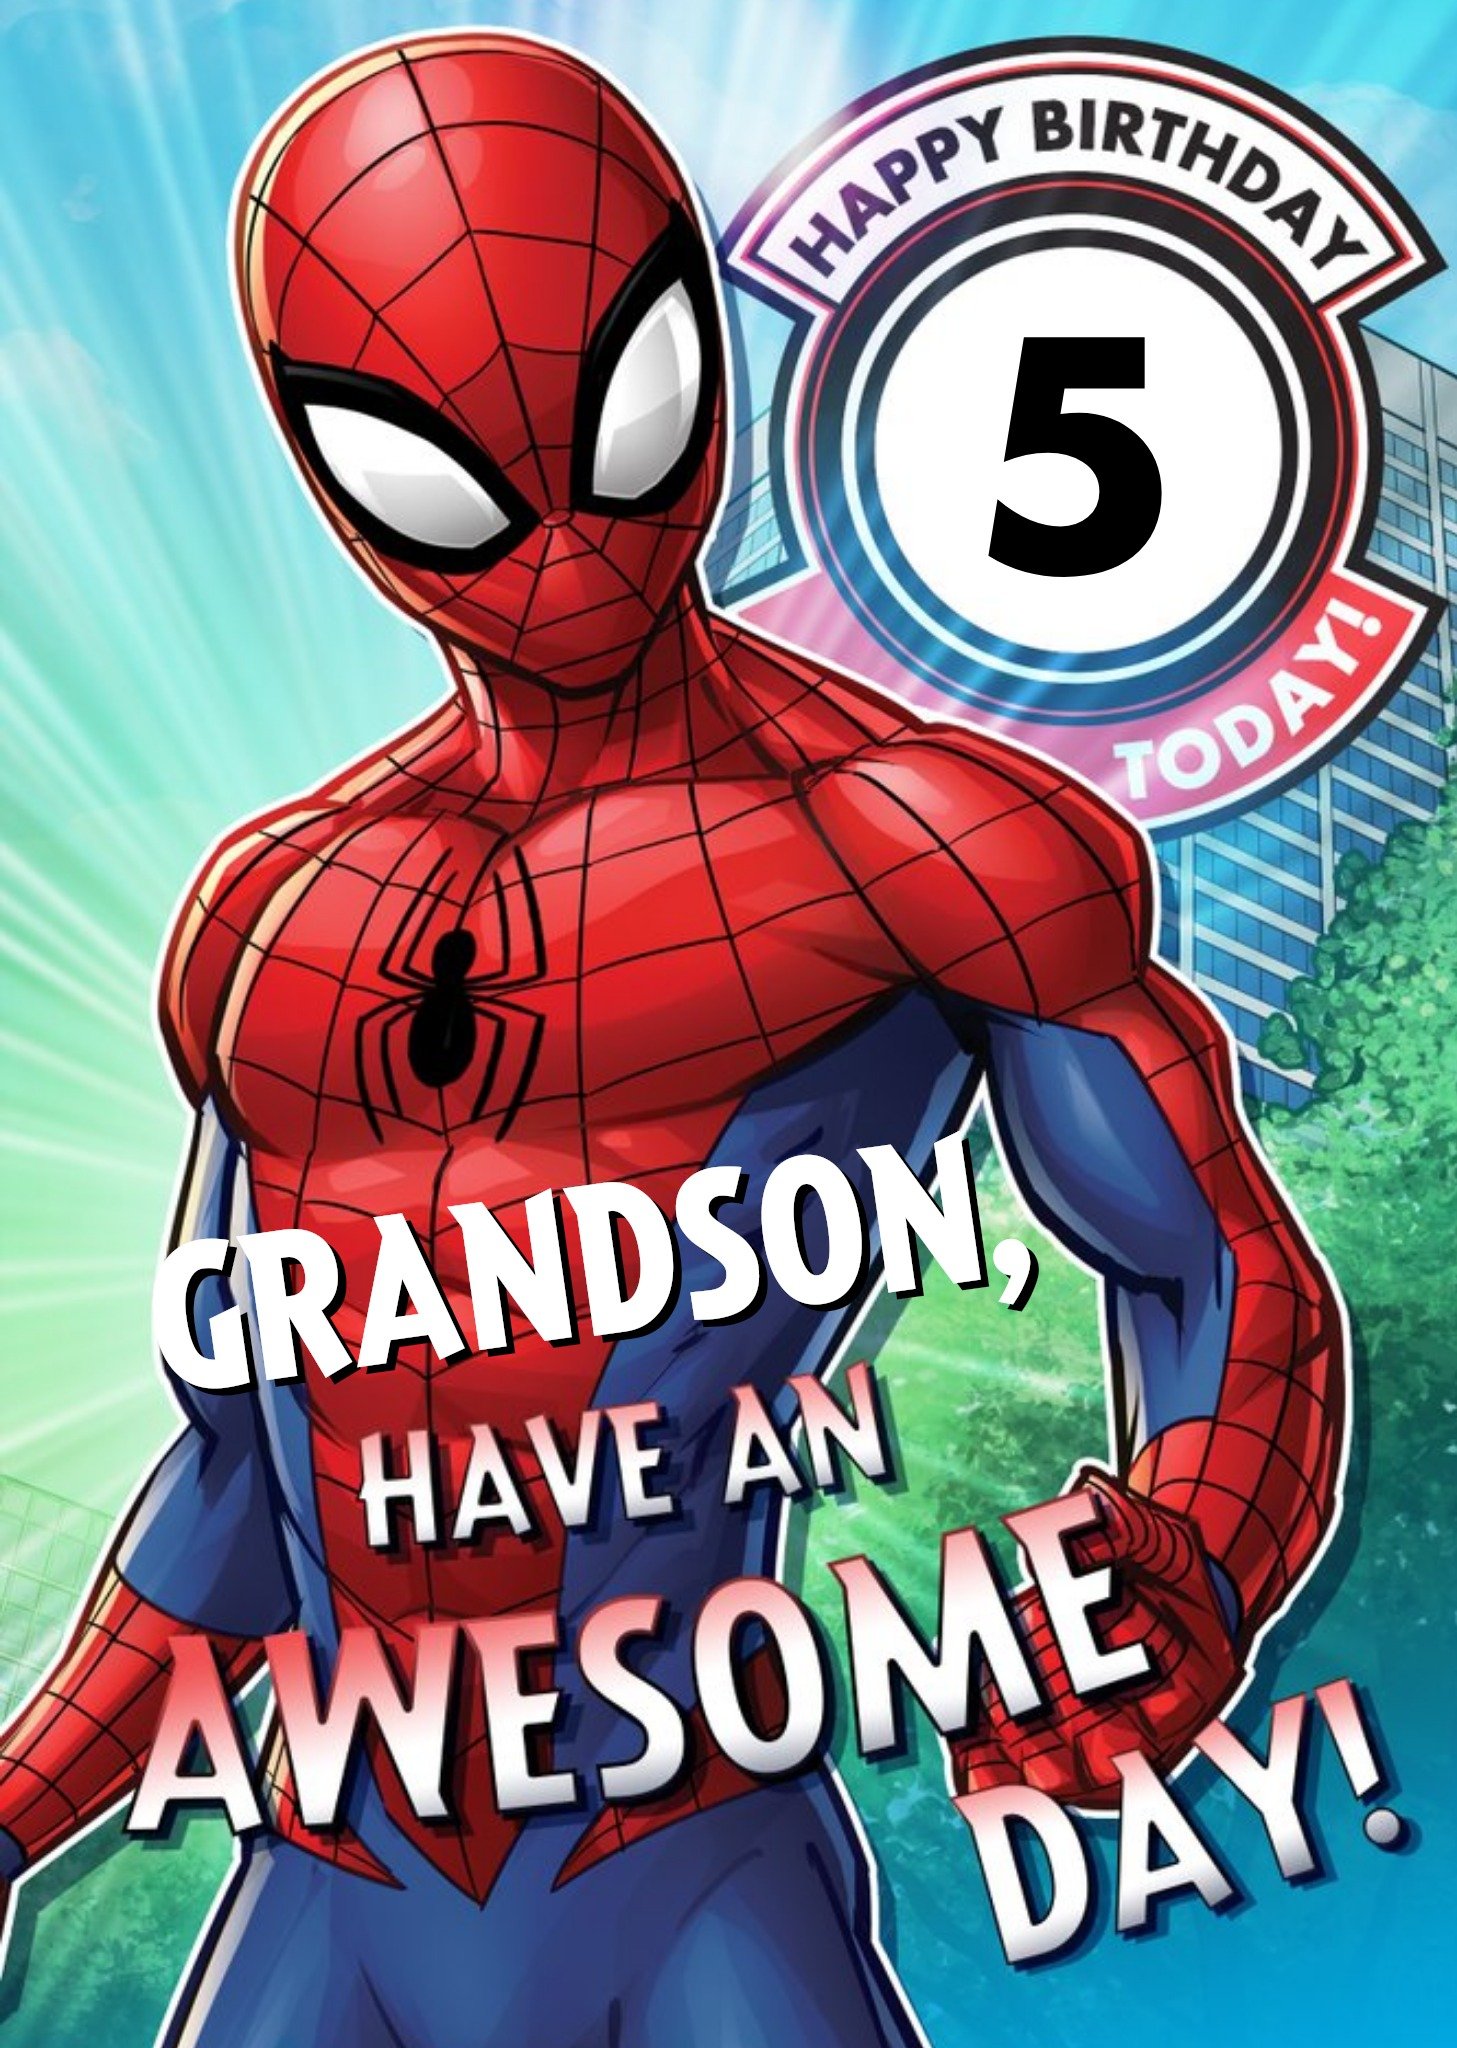 Marvel Spiderman Personalised Have An Awesome 5th Birthday Grandson Card Ecard